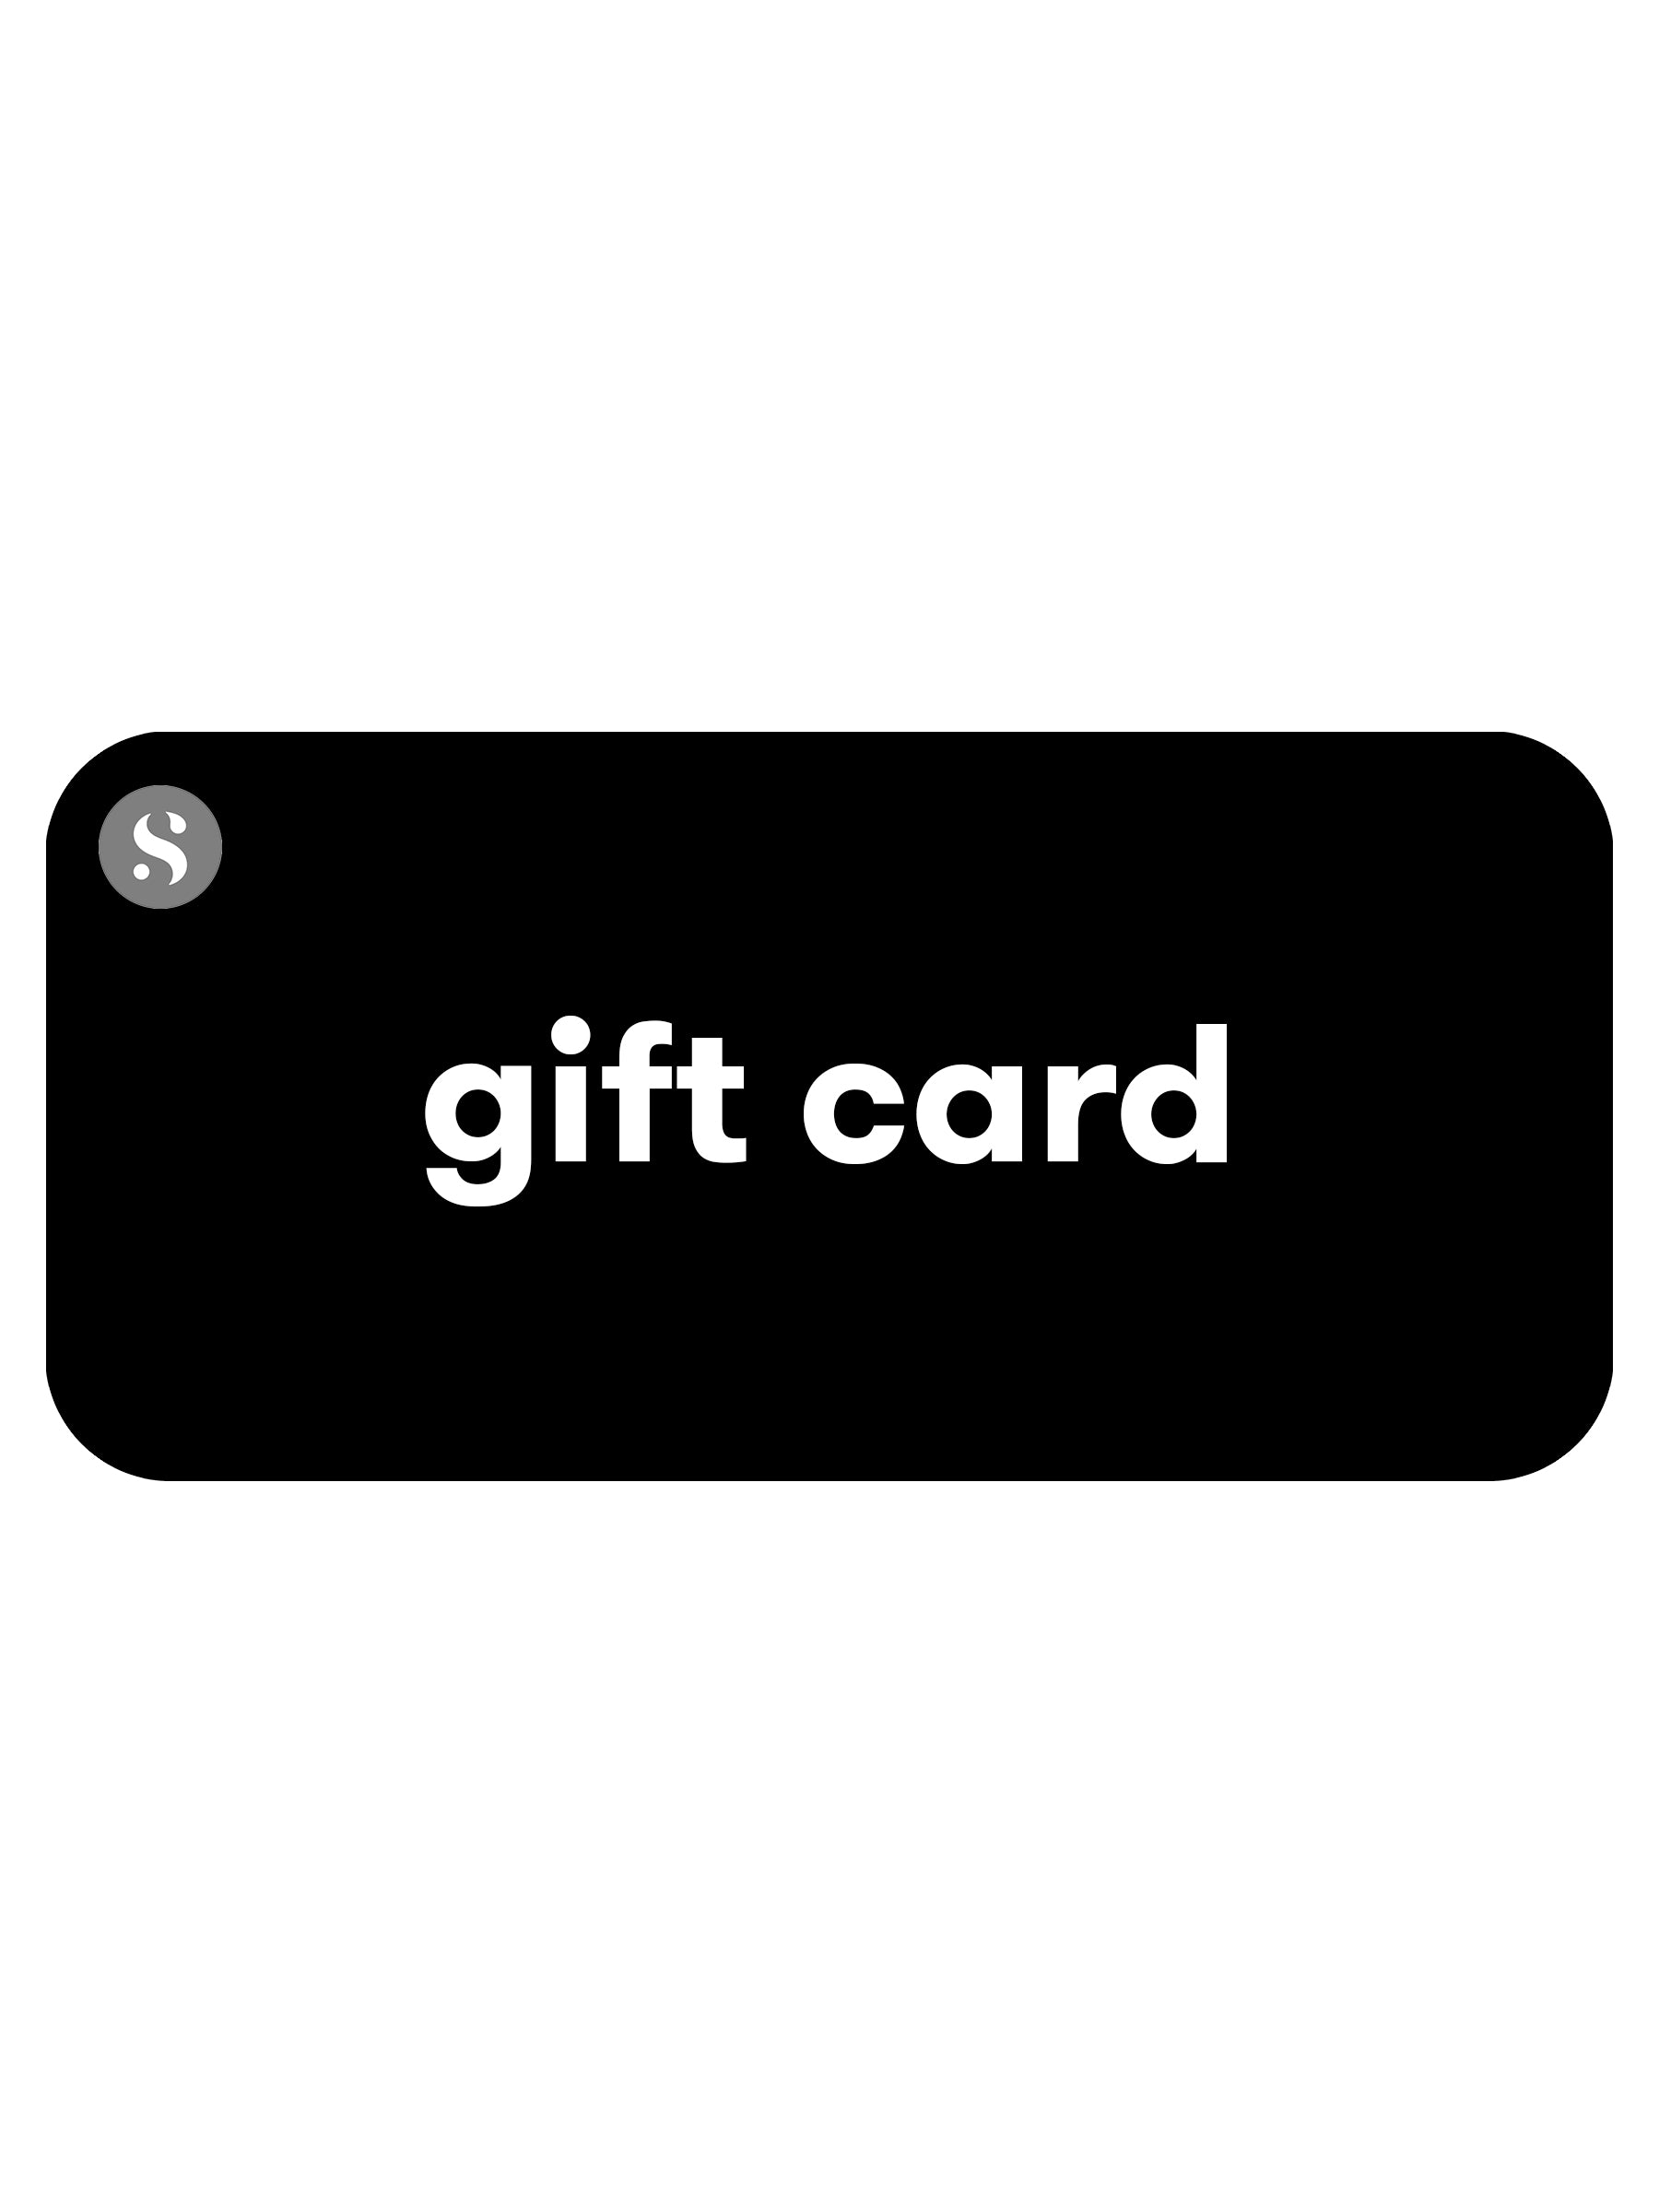 State gift card